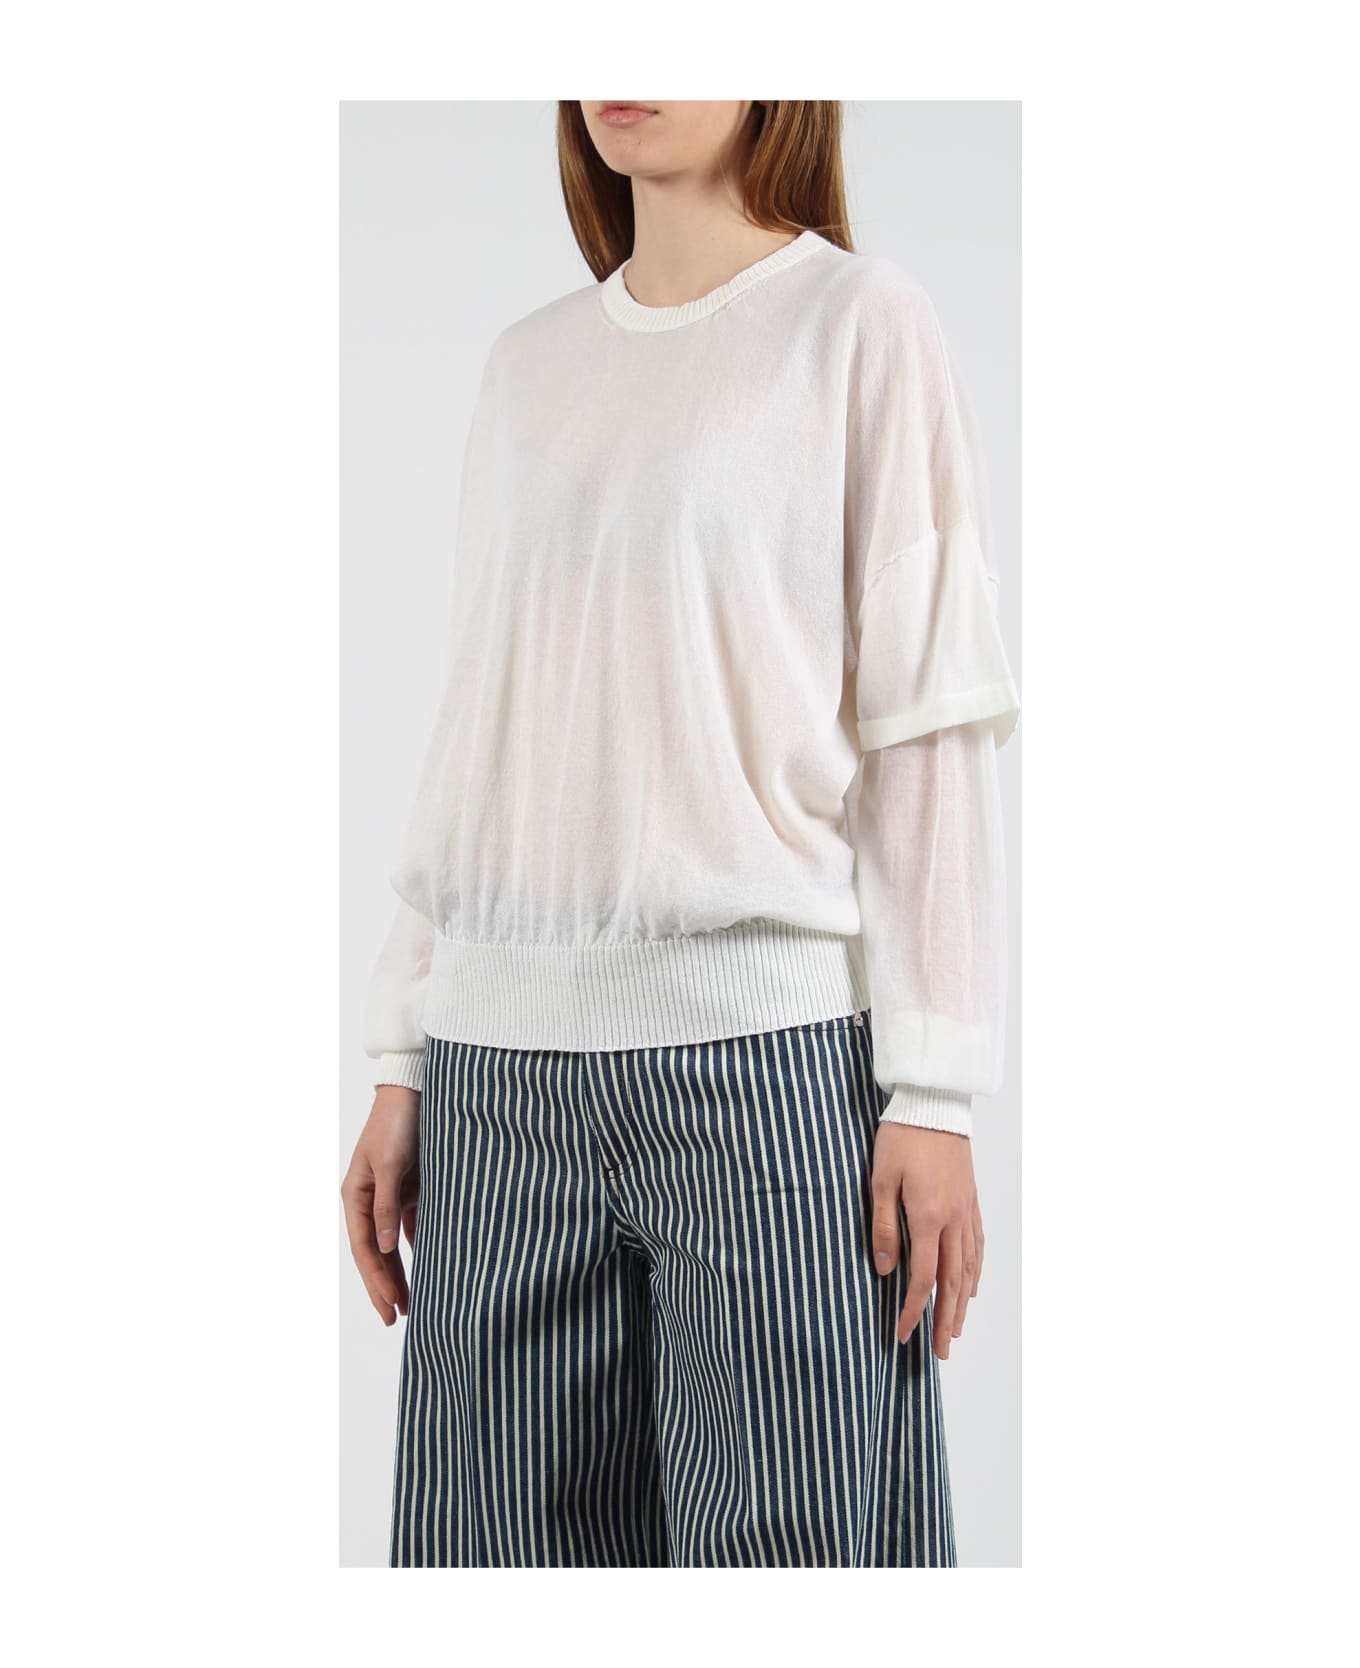 Atomo Factory Long-sleeved Knit Top - White